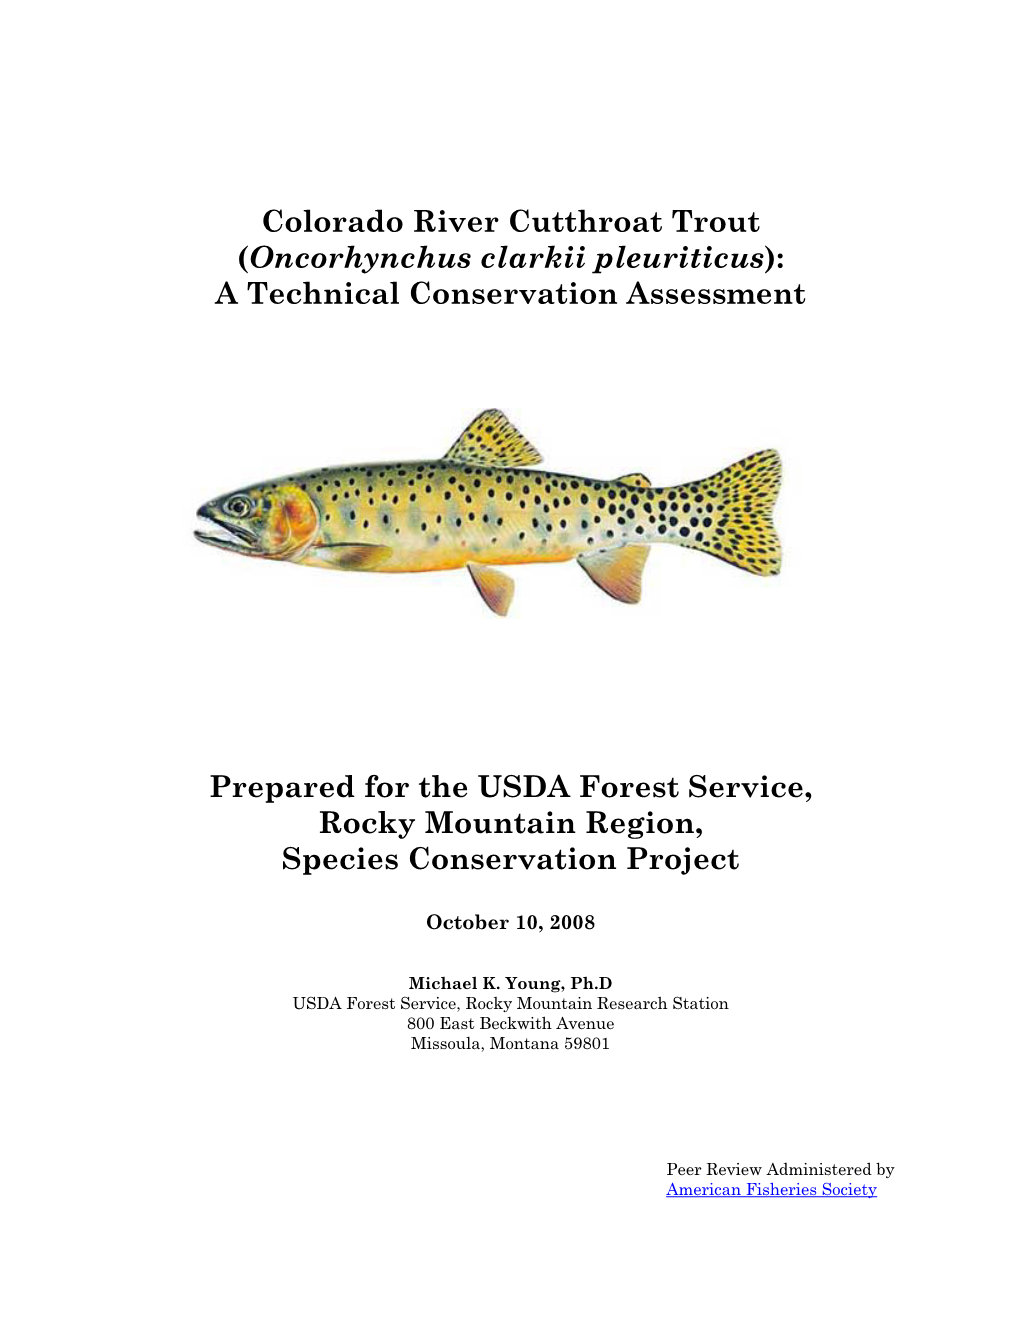 Colorado River Cutthroat Trout (Oncorhynchus Clarkii Pleuriticus): a Technical Conservation Assessment